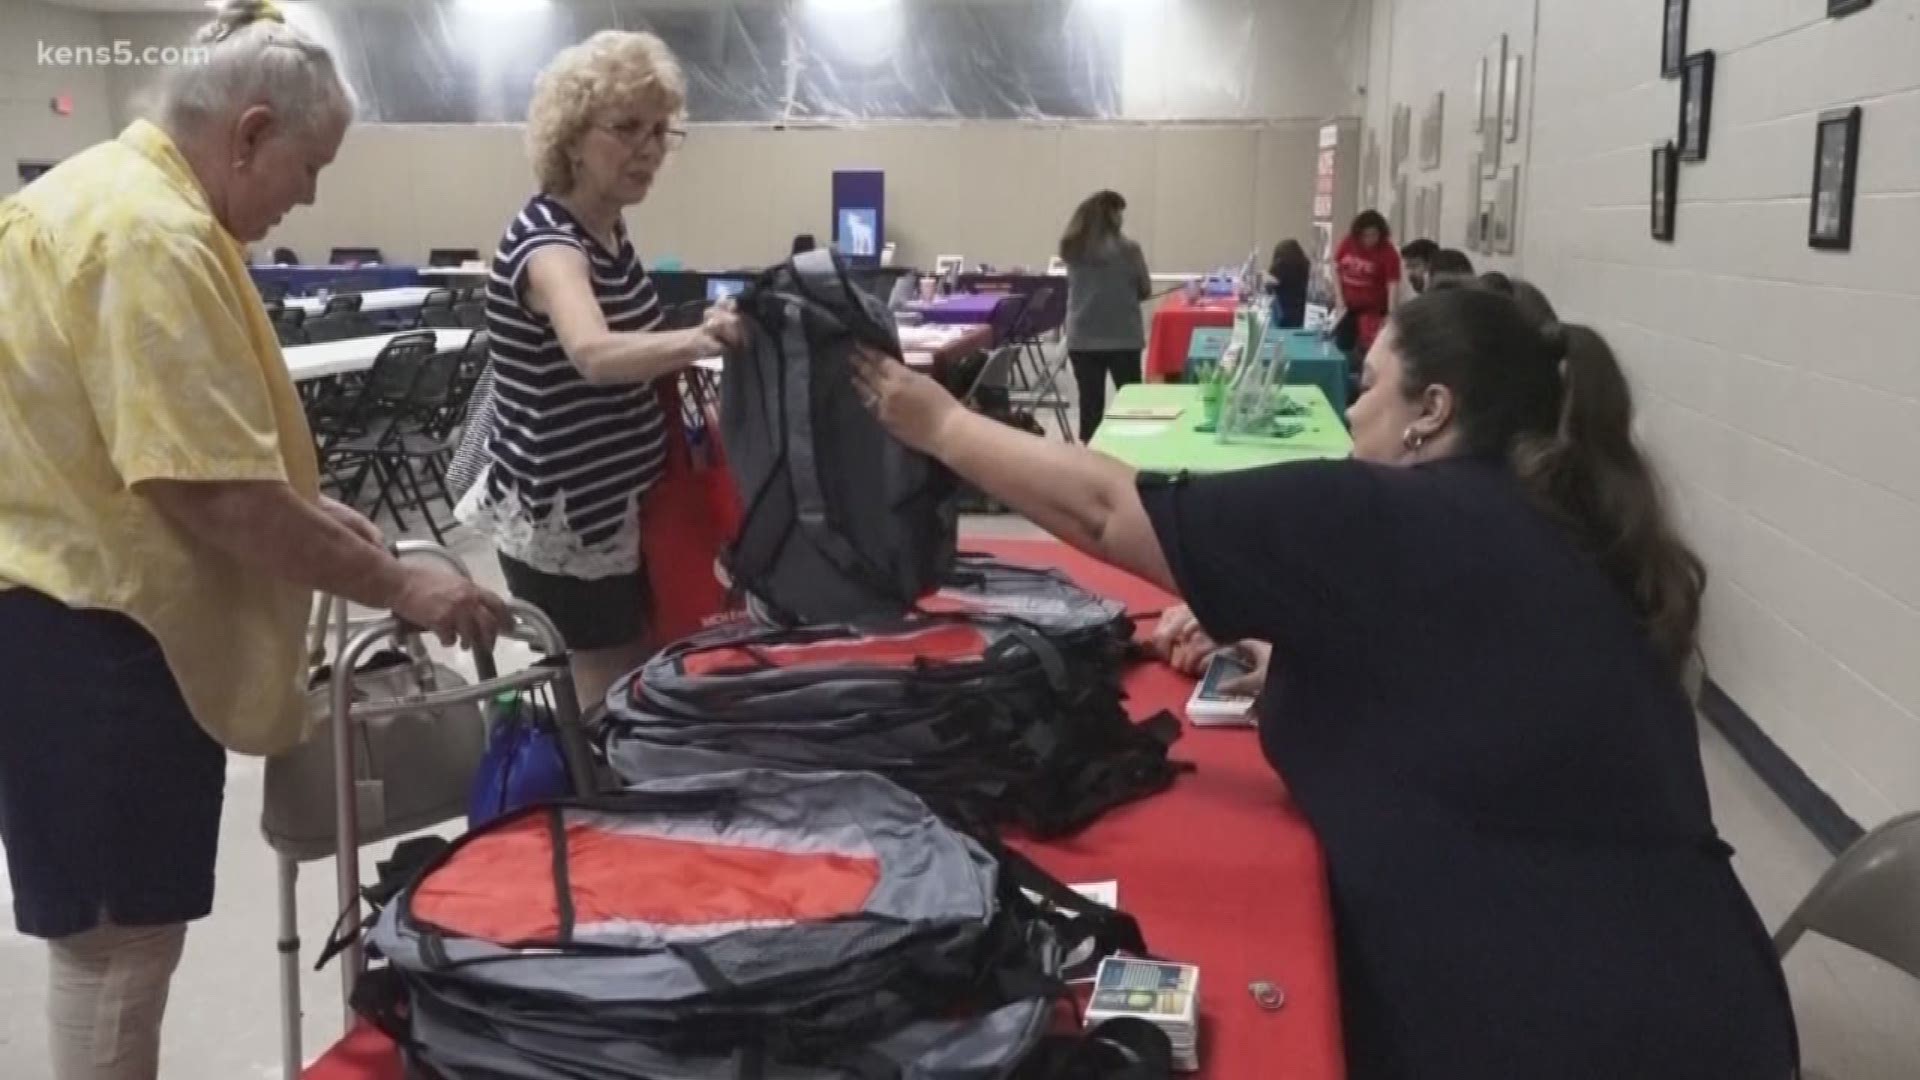 Several local nonprofits are helping families buy supplies for their kids who are getting ready to head back to school.